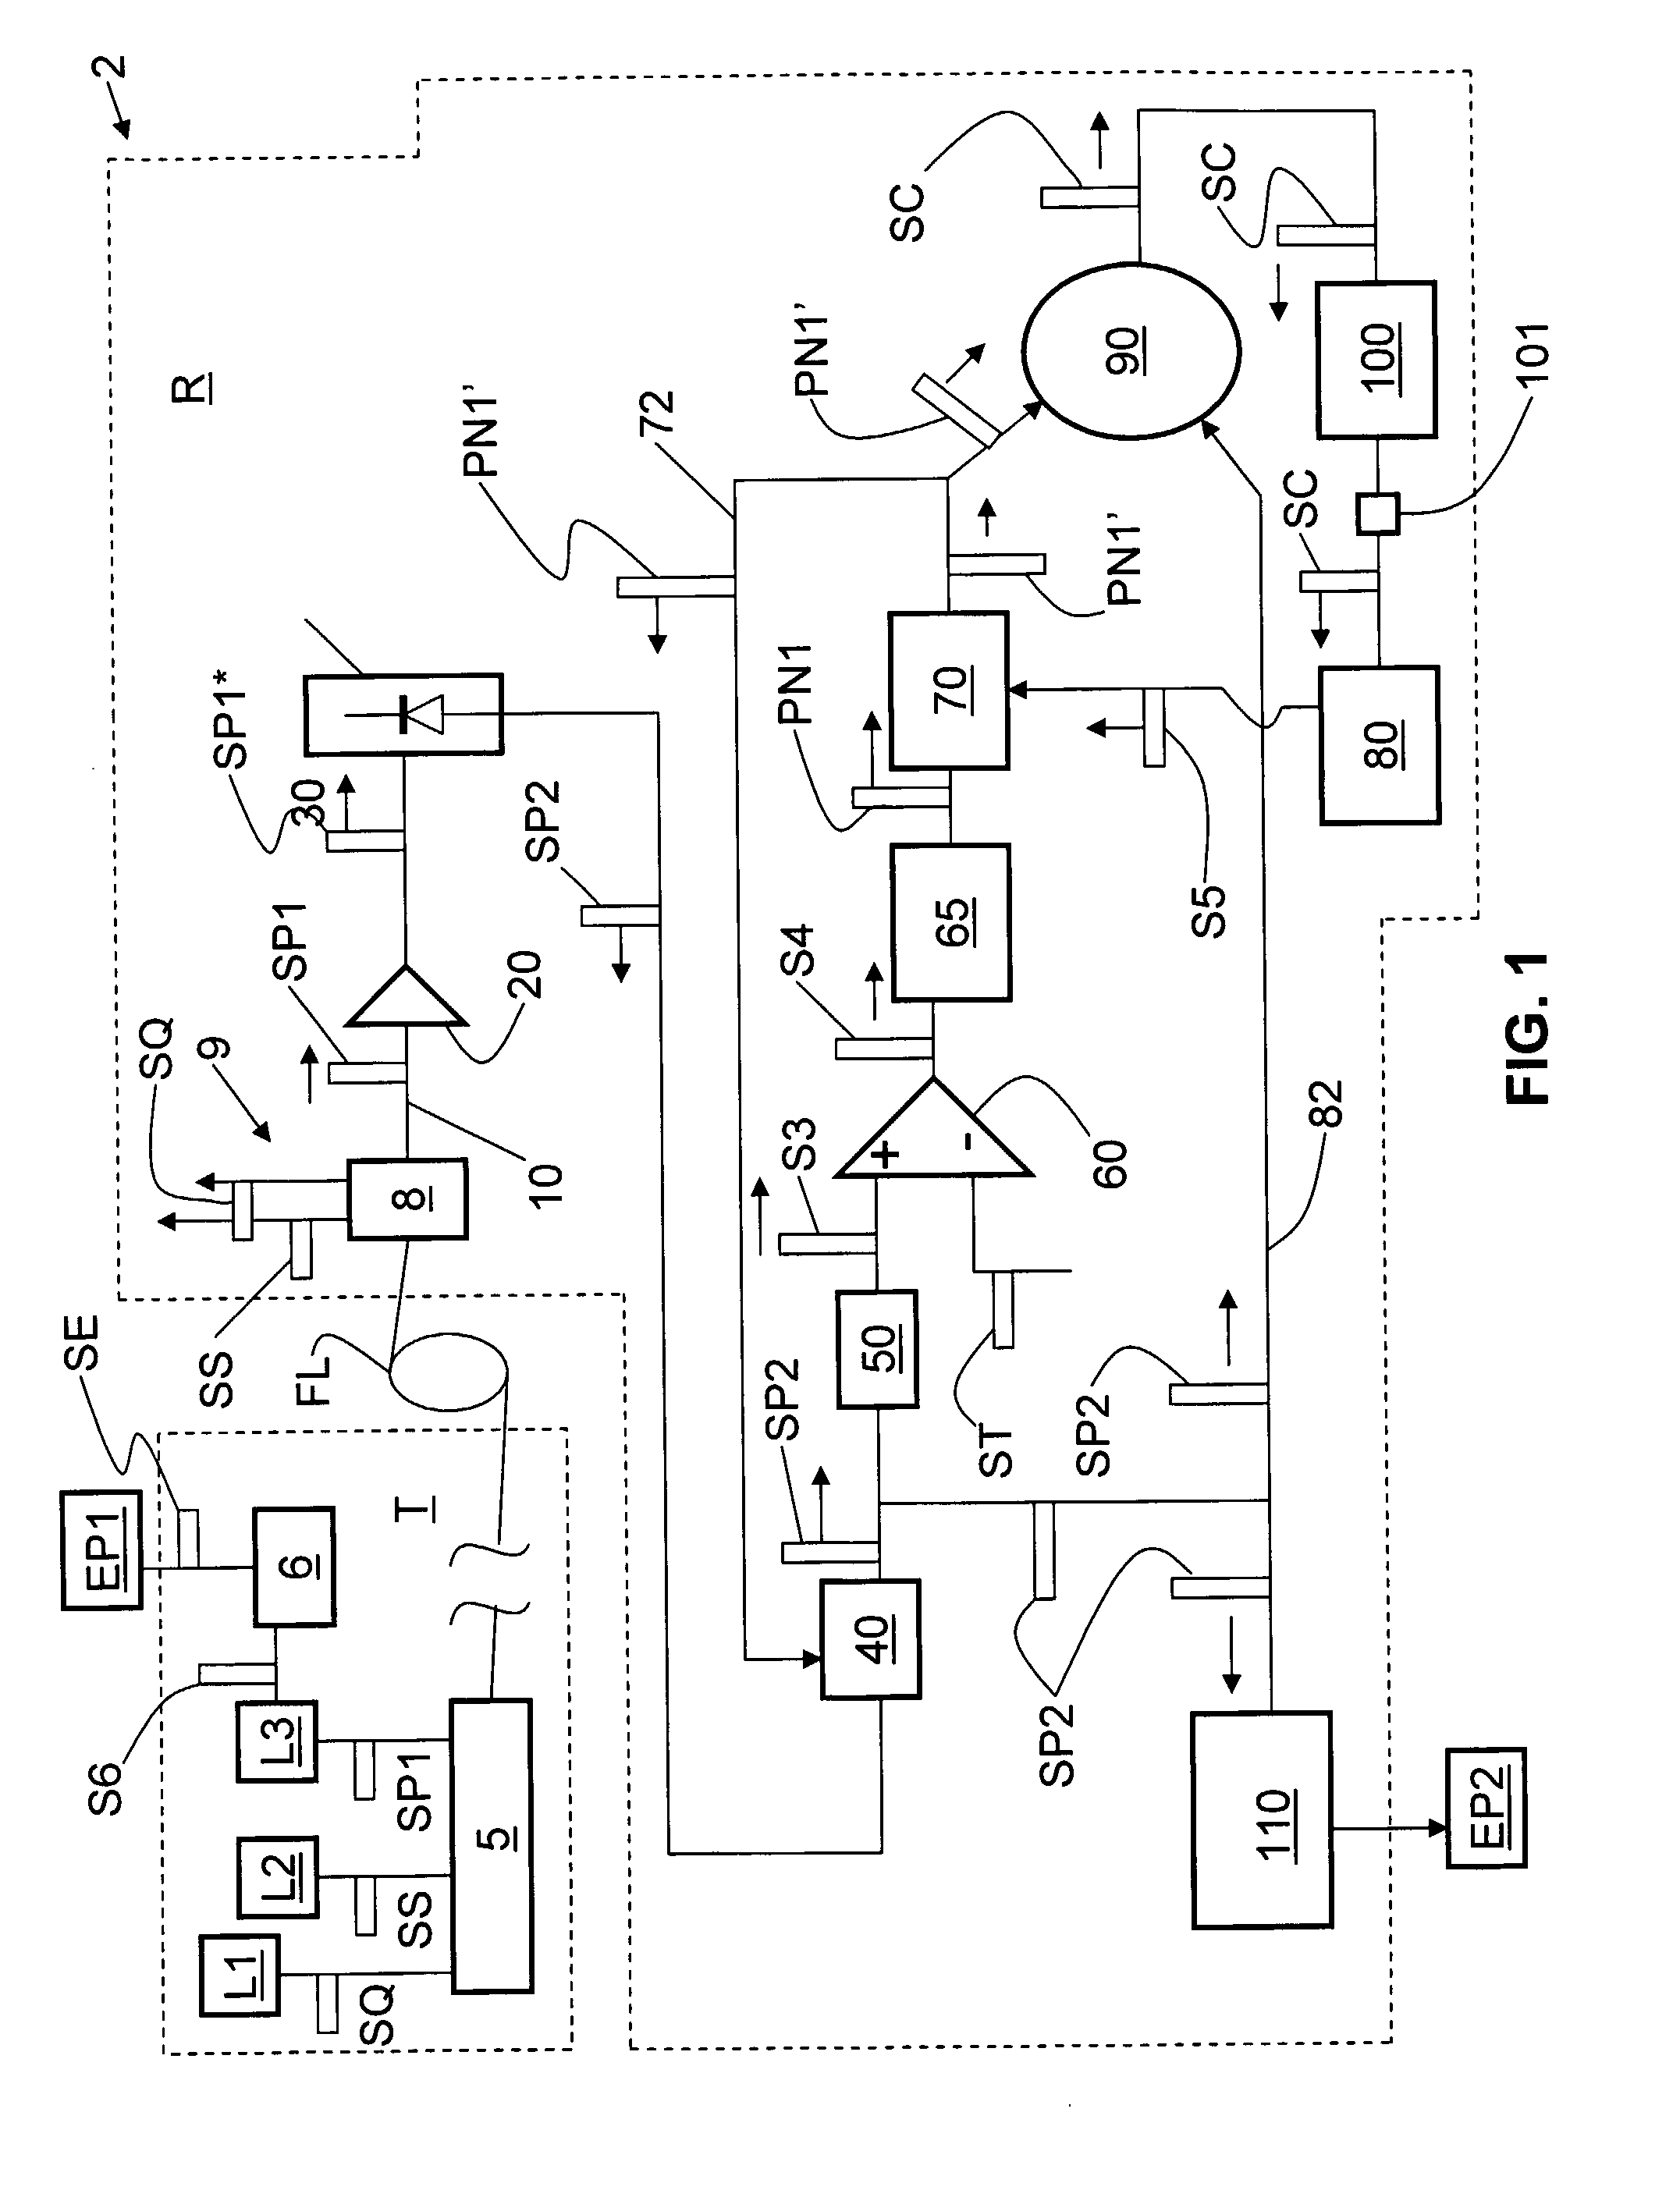 Systems and Methods for Multiplexing Qkd Channels